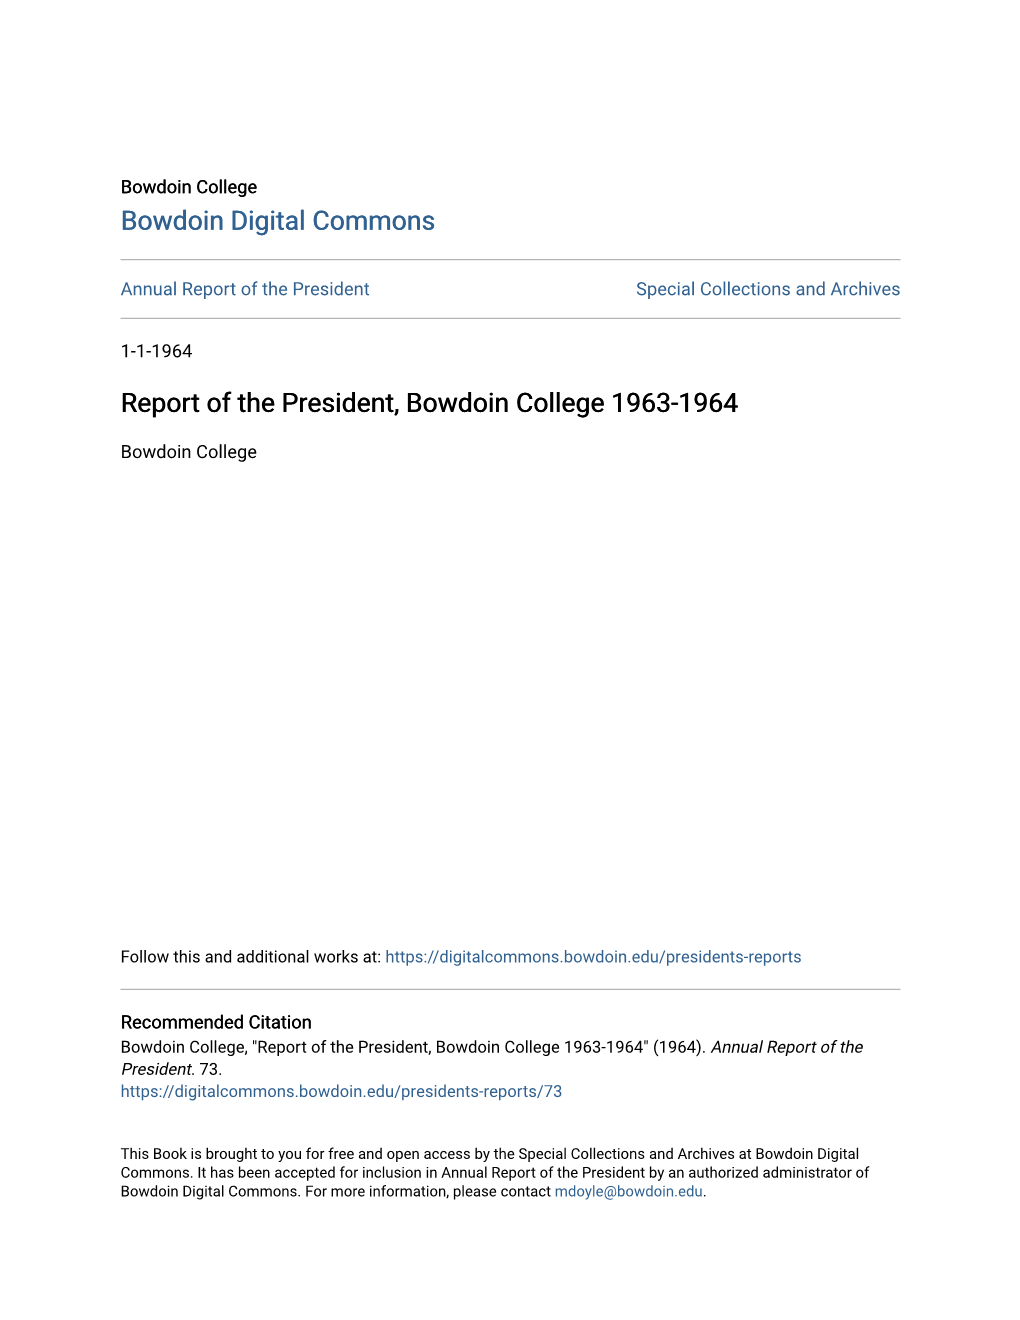 Report of the President, Bowdoin College 1963-1964